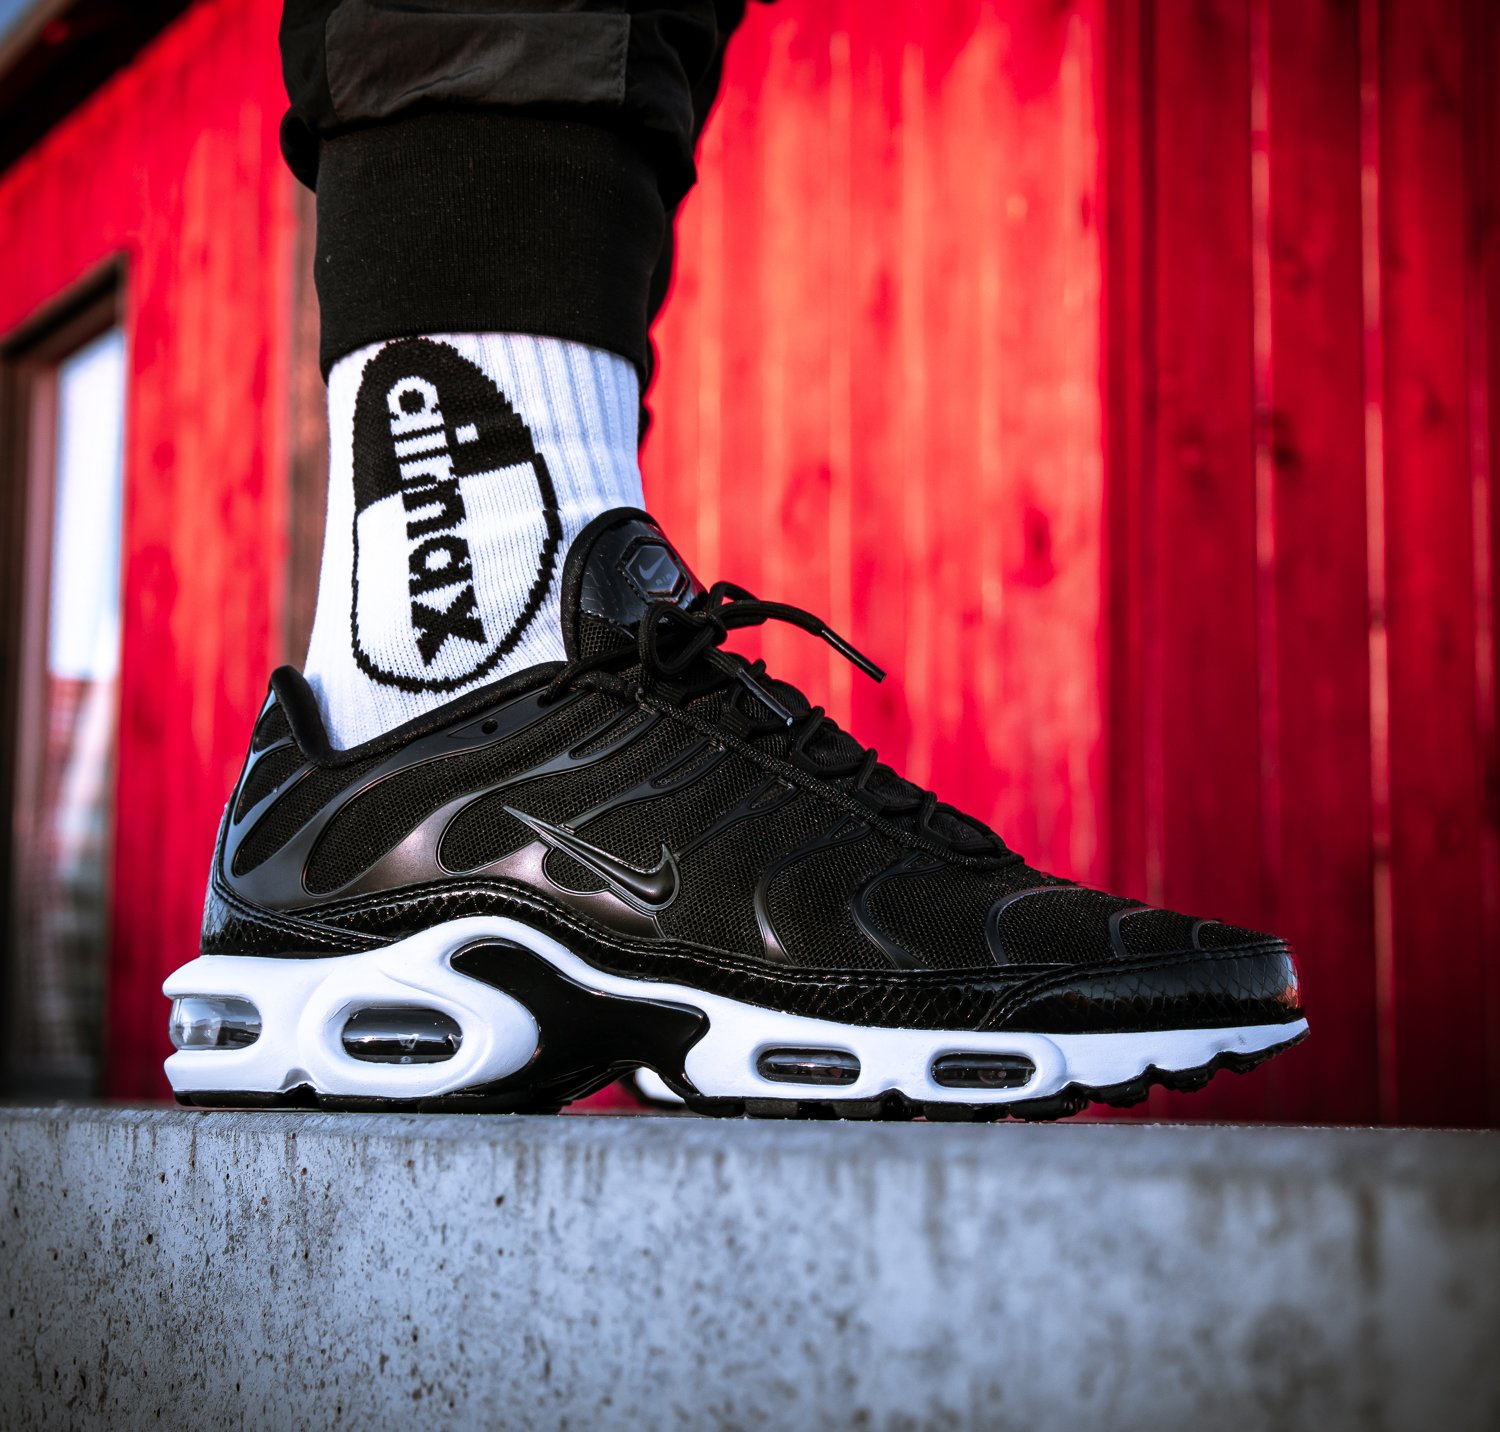 Solekitchen on Twitter: "Tuned Life! The Max Plus SE „Black/White" is available our store and online. 36,5 - 44,5 | € 180 | shoplink: https://t.co/3zBldCW48b Socks: https://t.co/49CFn32GzM #nike #airmaxPlus #